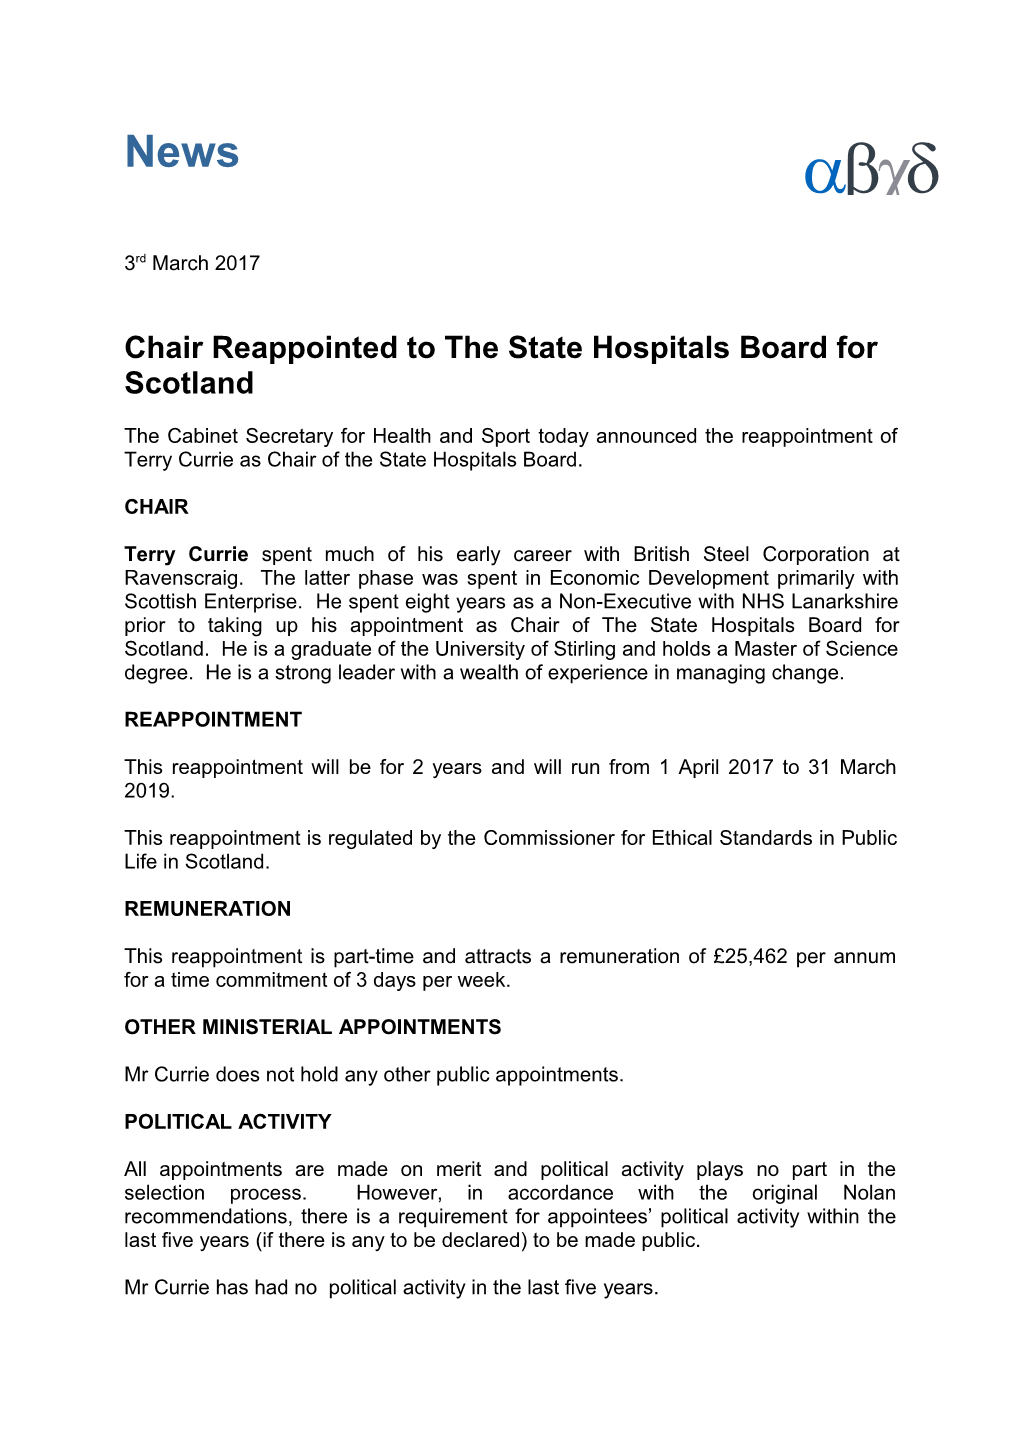 Chair Reappointed to the State Hospitals Board for Scotland